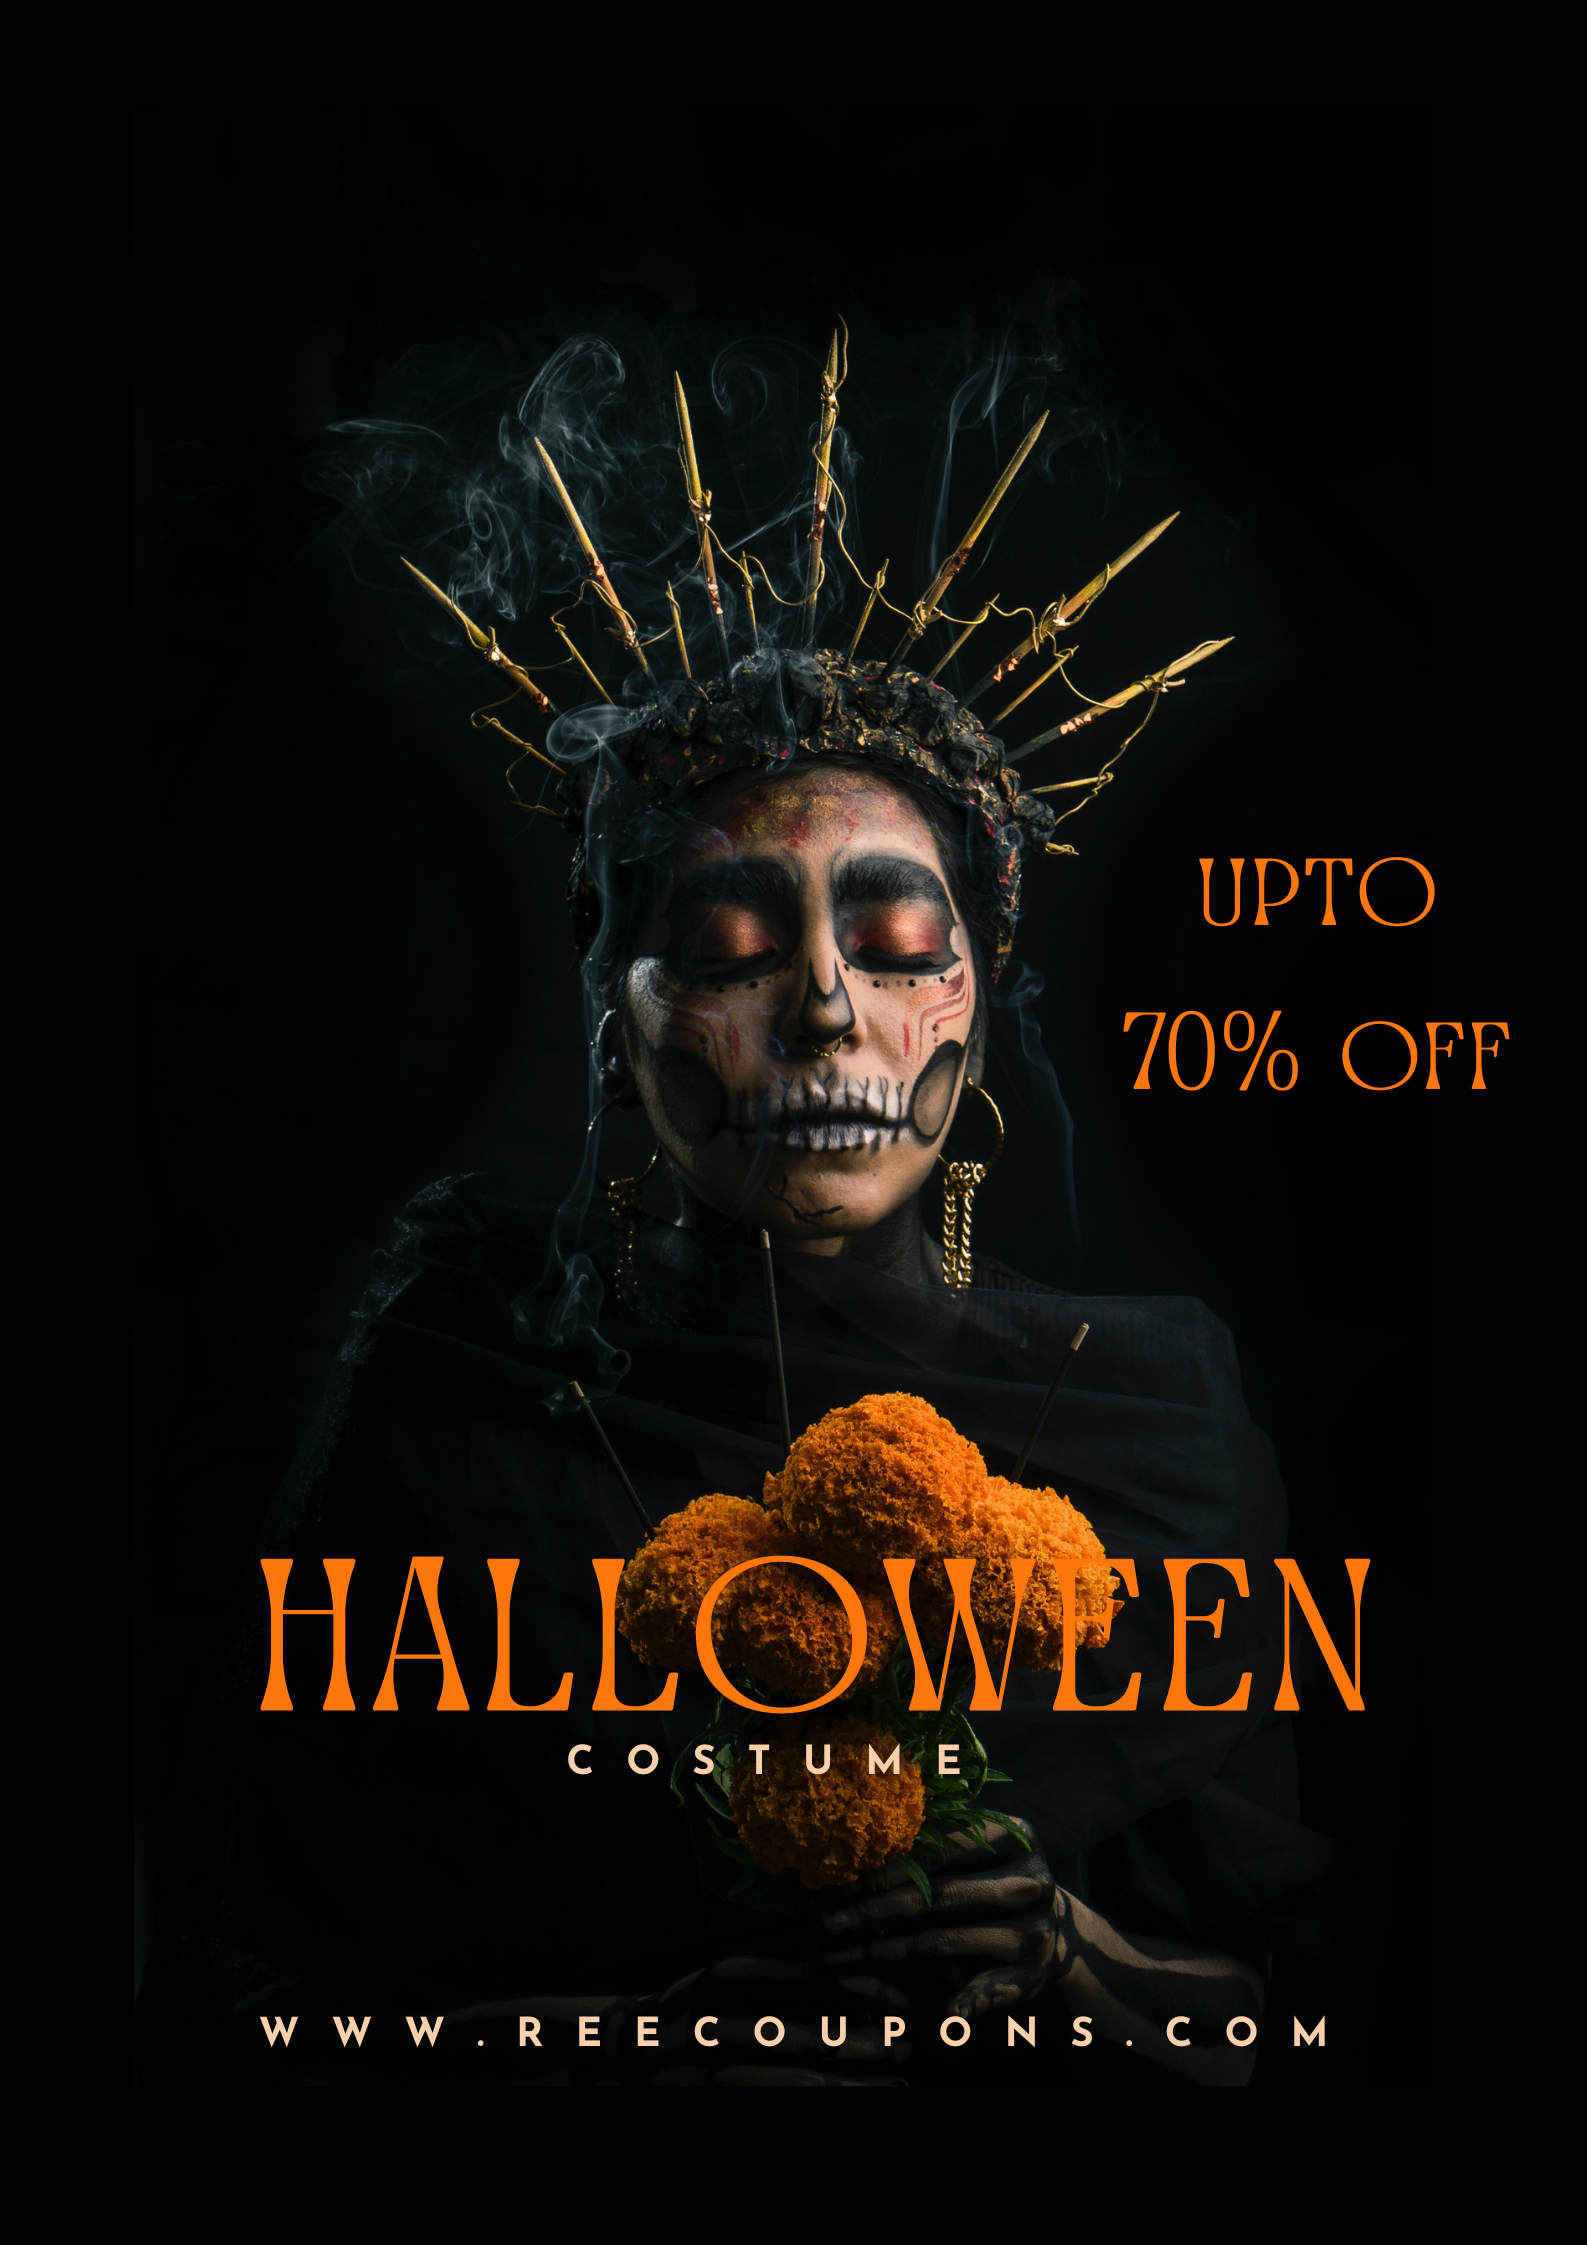 Halloween Fun with Exclusive Costume Coupon Codes